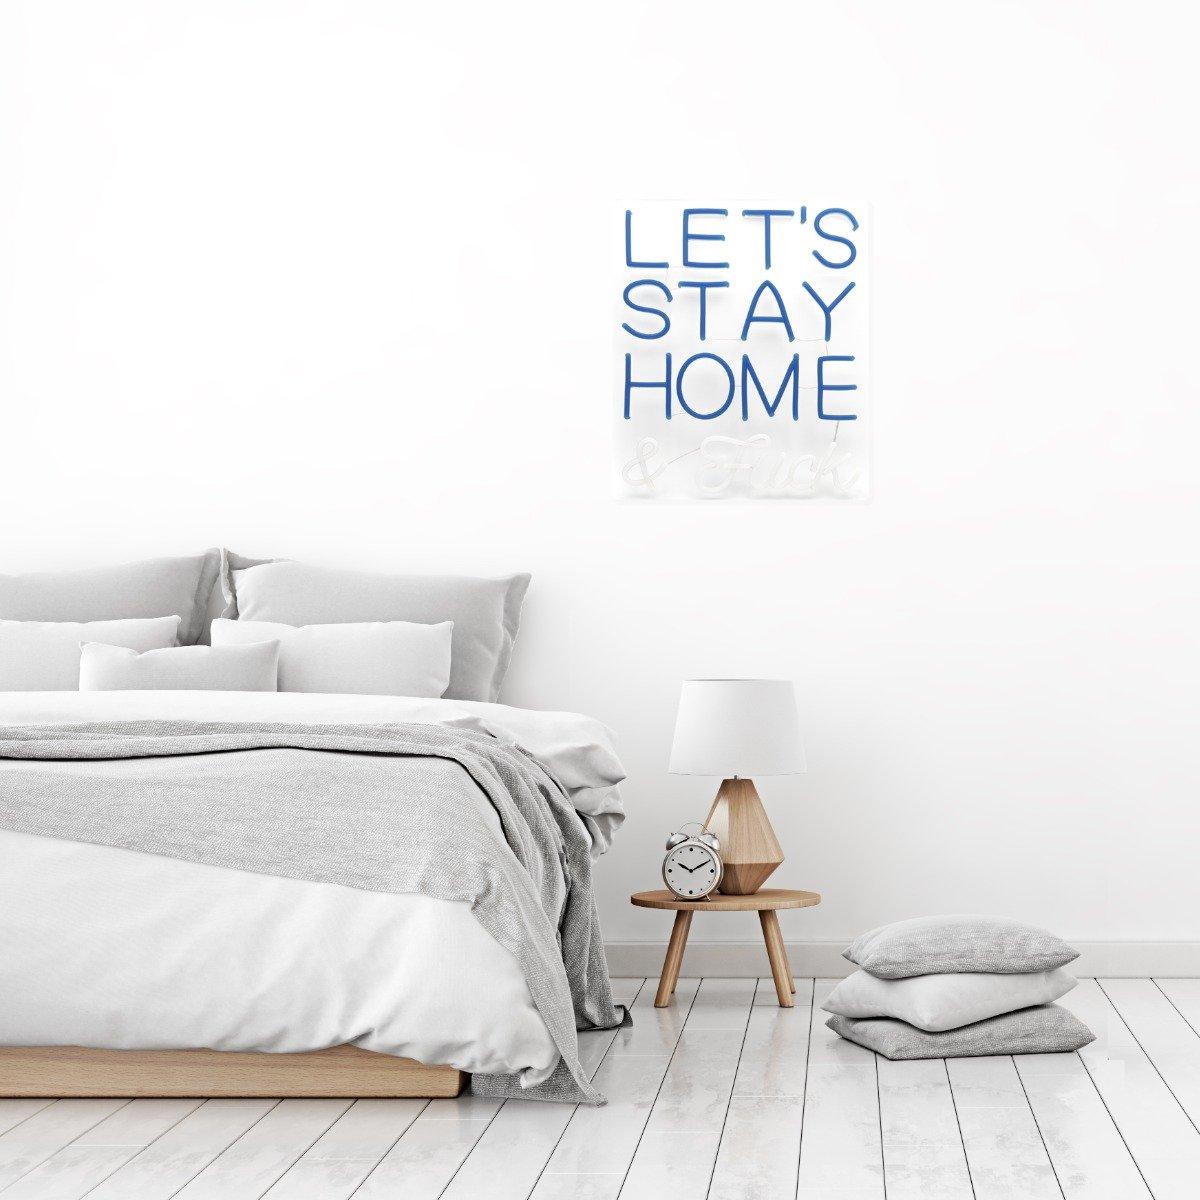 Locomocean LED Wandneon - Lets Stay Home and F*ck blau  